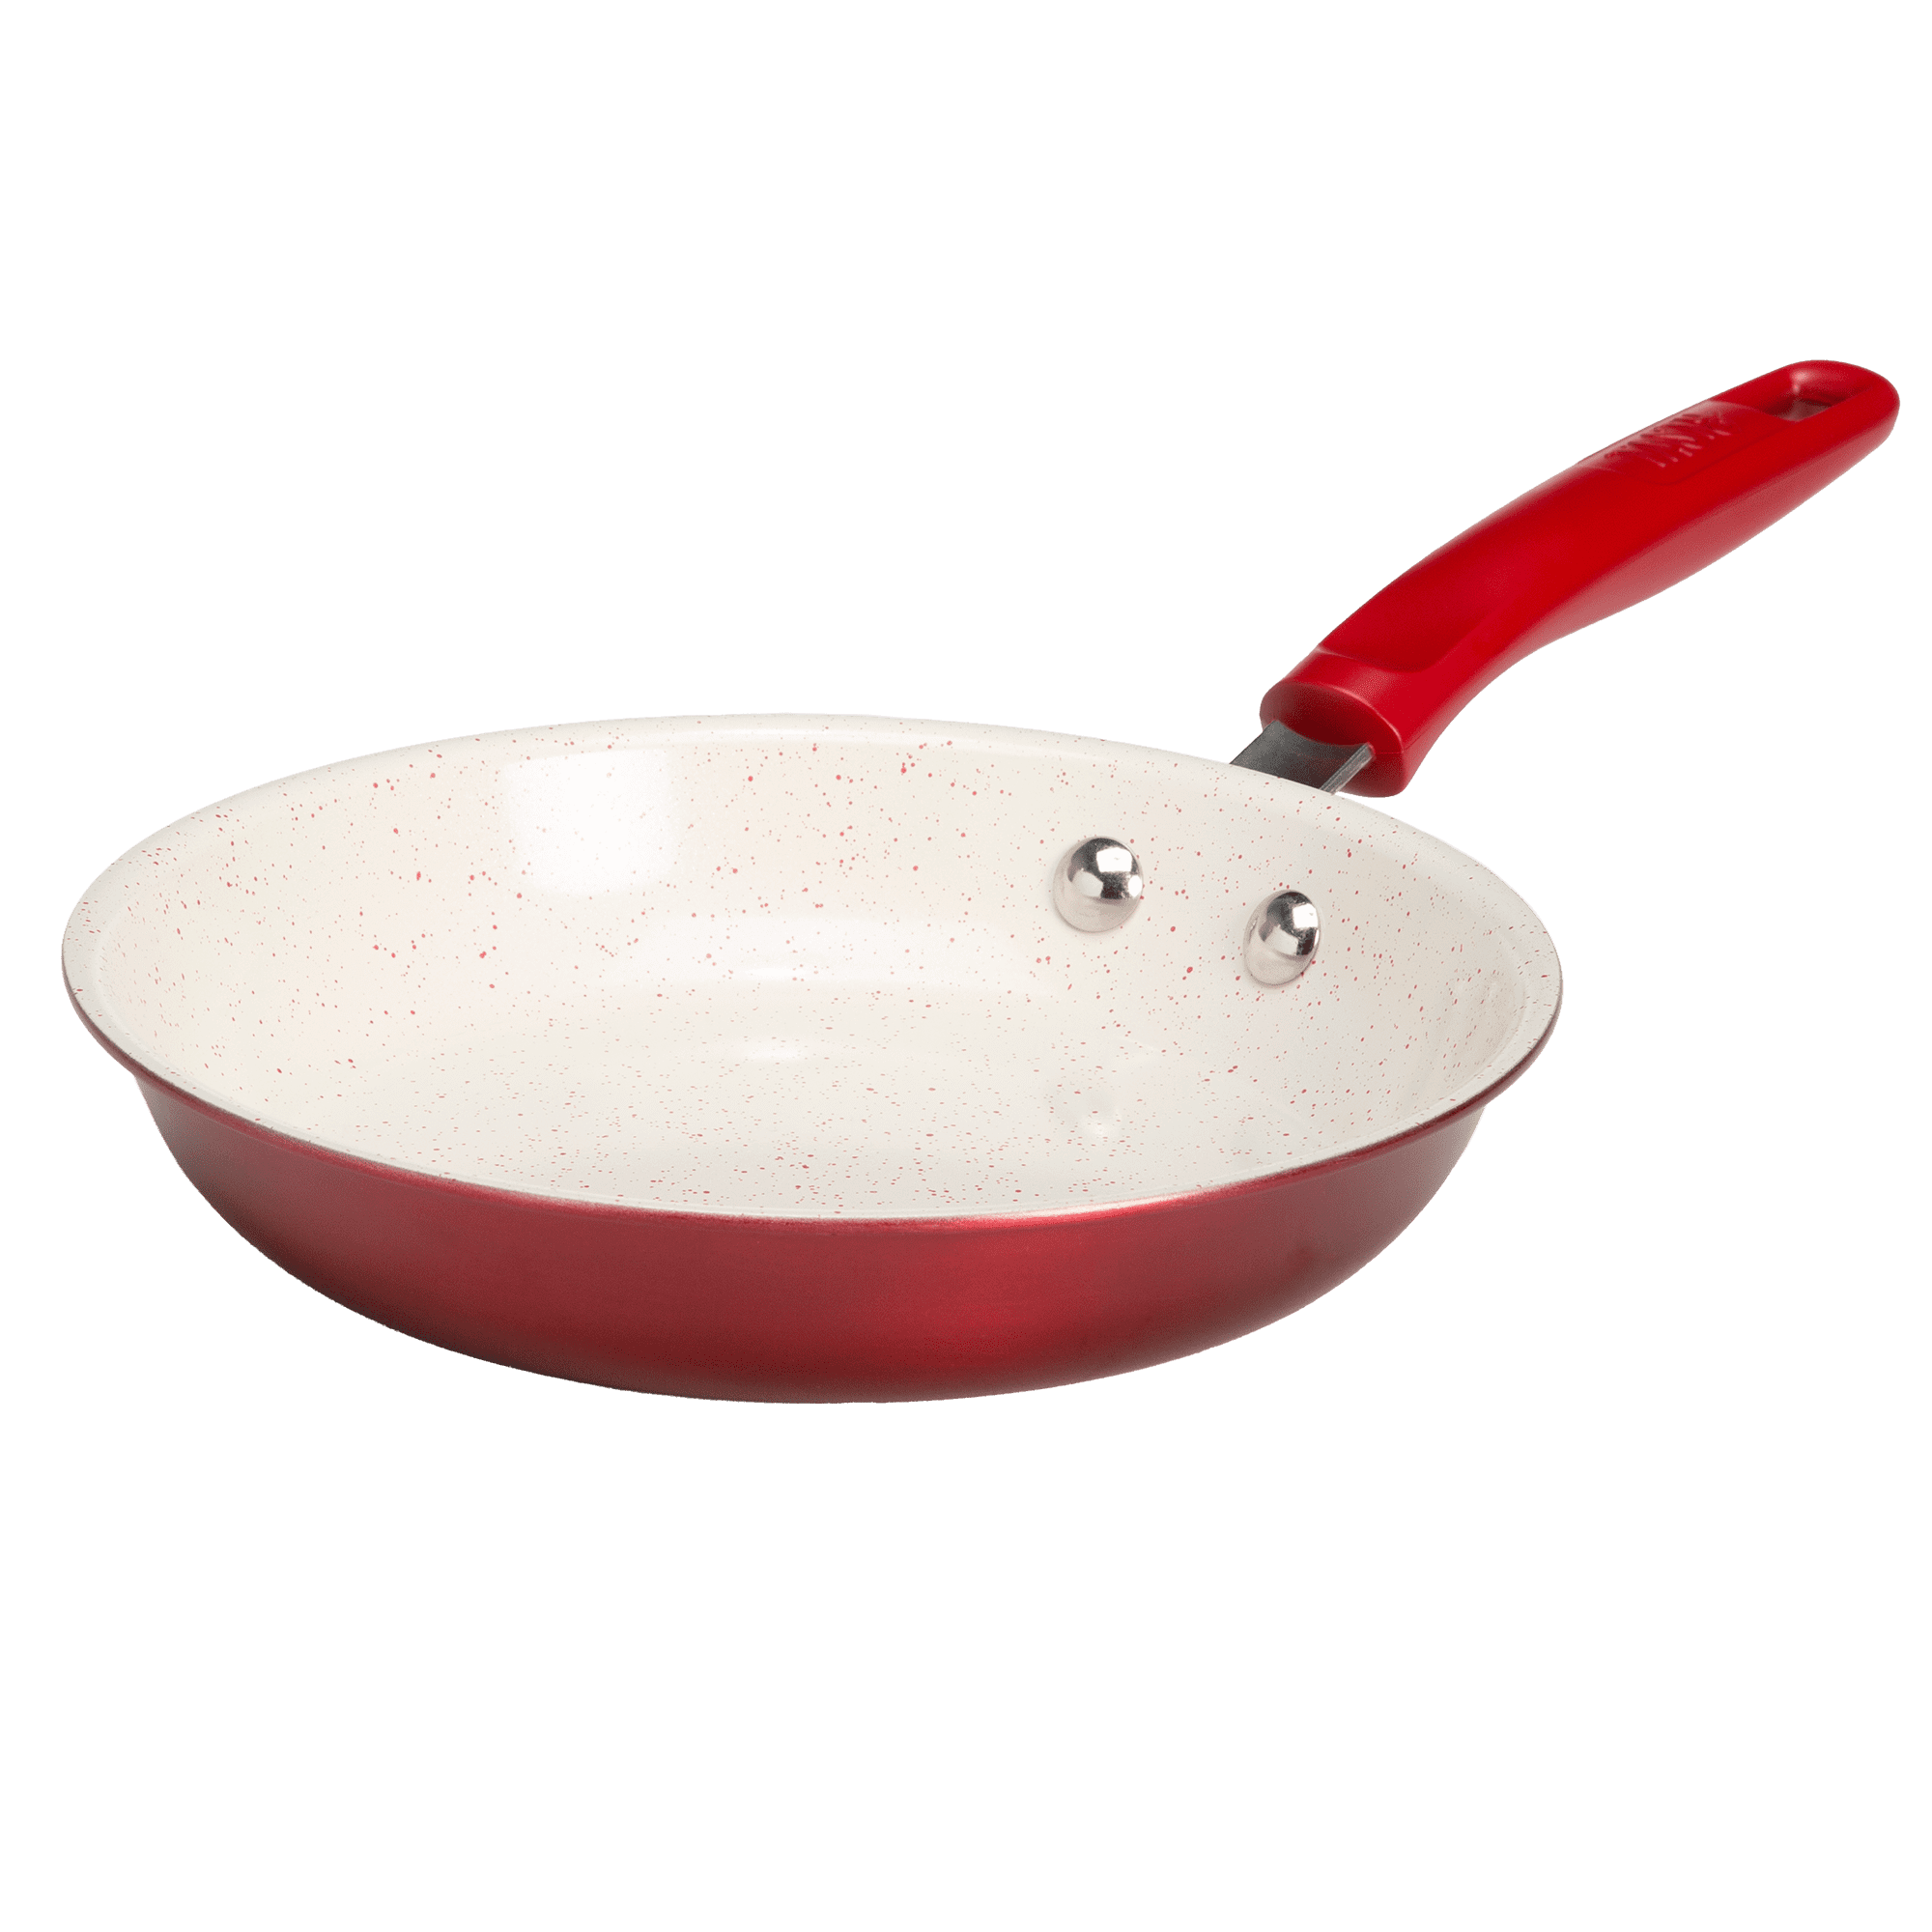 Tasty Clean Ceramic 8 inch Non-Stick Aluminum Fry Pan, Red